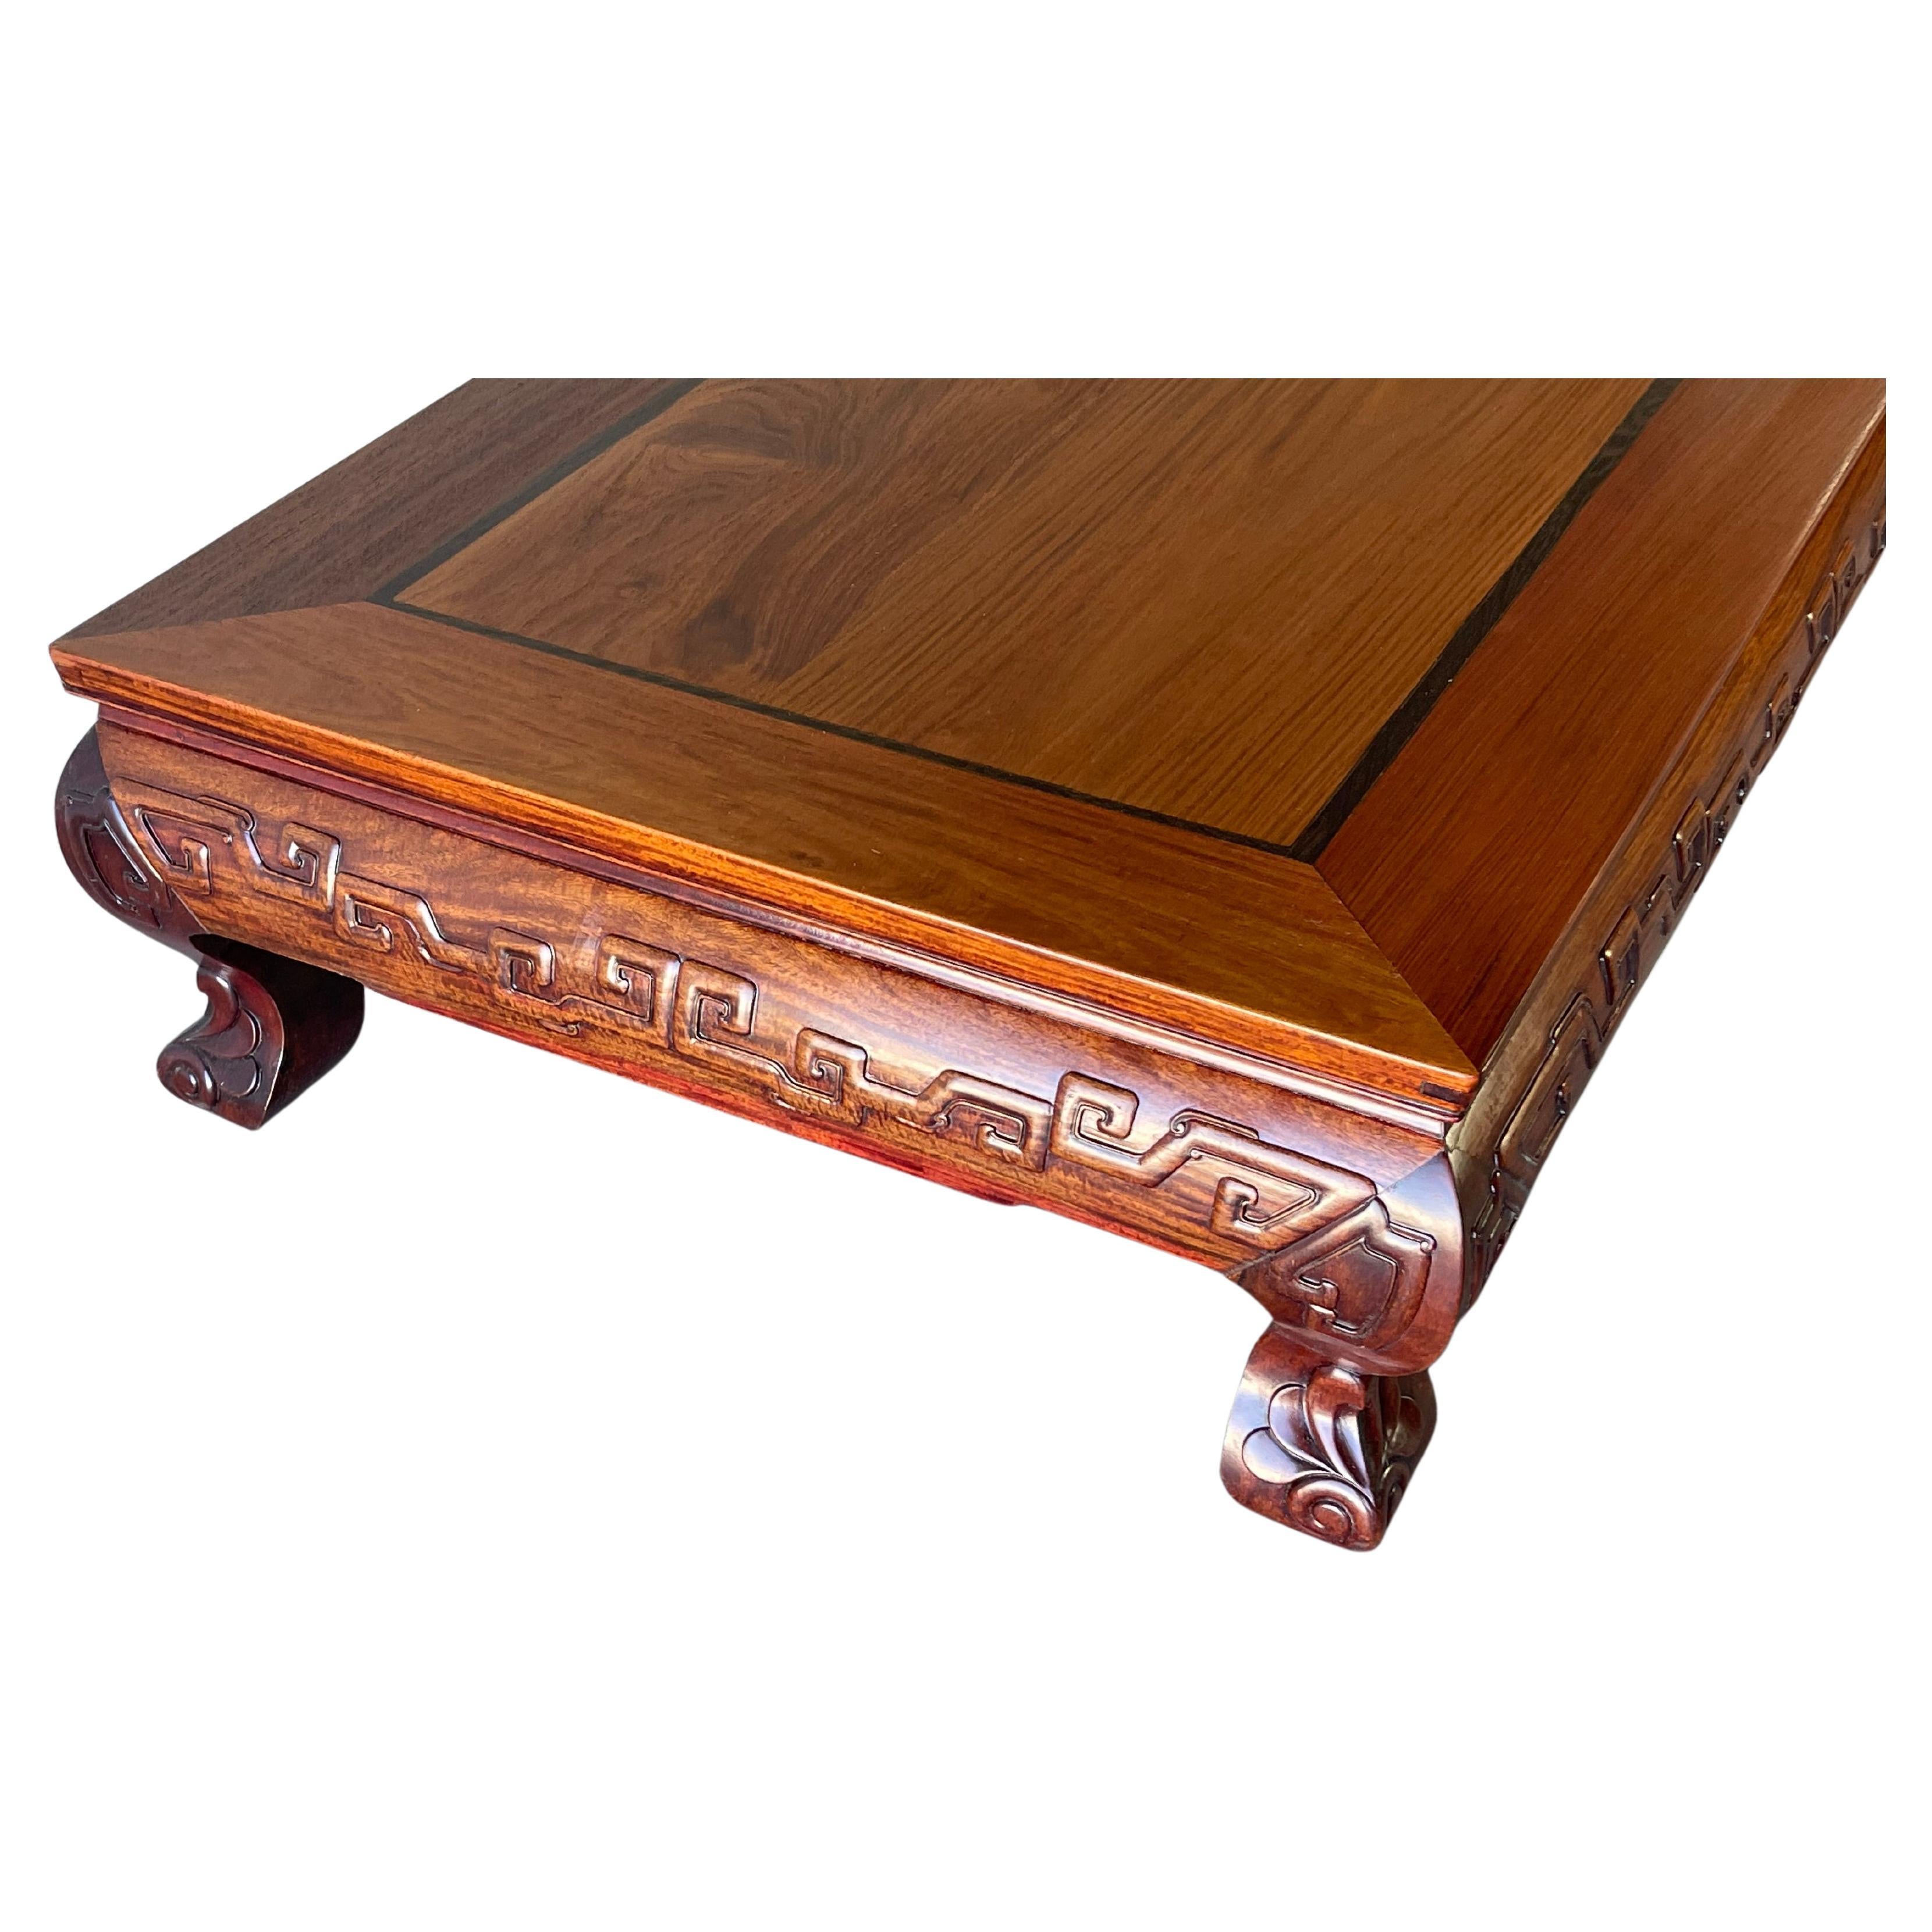 1900’s Japanese / Asian  Rosewood & Eboy Zataku Low / Coffee Table In Excellent Condition For Sale In Las Vegas, NV